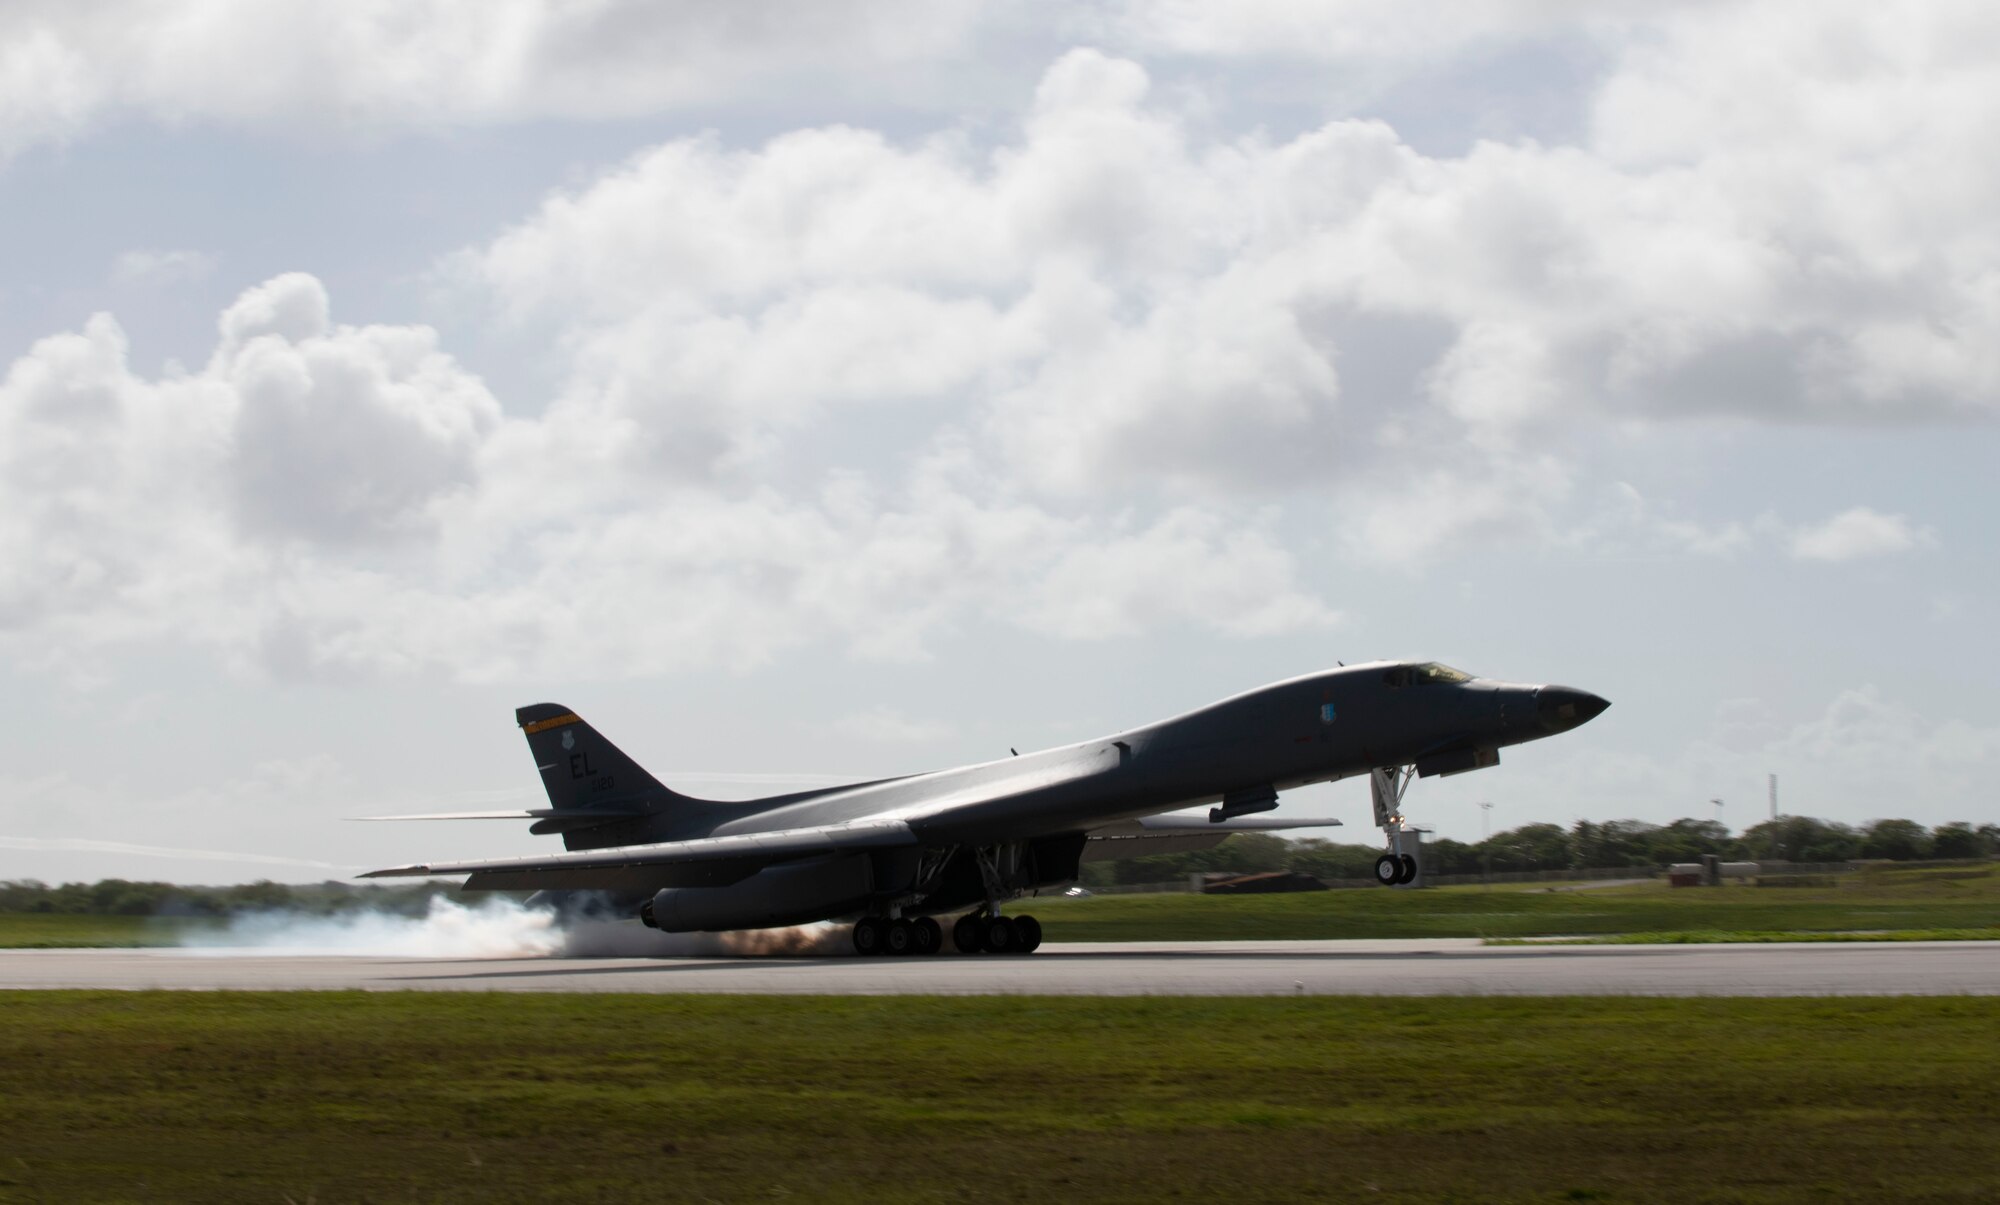 A B-1B Lancer, deployed from Ellsworth Air Force Base, S.D., lands at Andersen AFB, Guam, July 17, 2020. The Bomber Task Force is deployed to Andersen AFB in support of Pacific Air Forces’ training efforts with allies, partners and joint forces. (U.S. Air Force Photo by Airman 1st Class Christina Bennett)